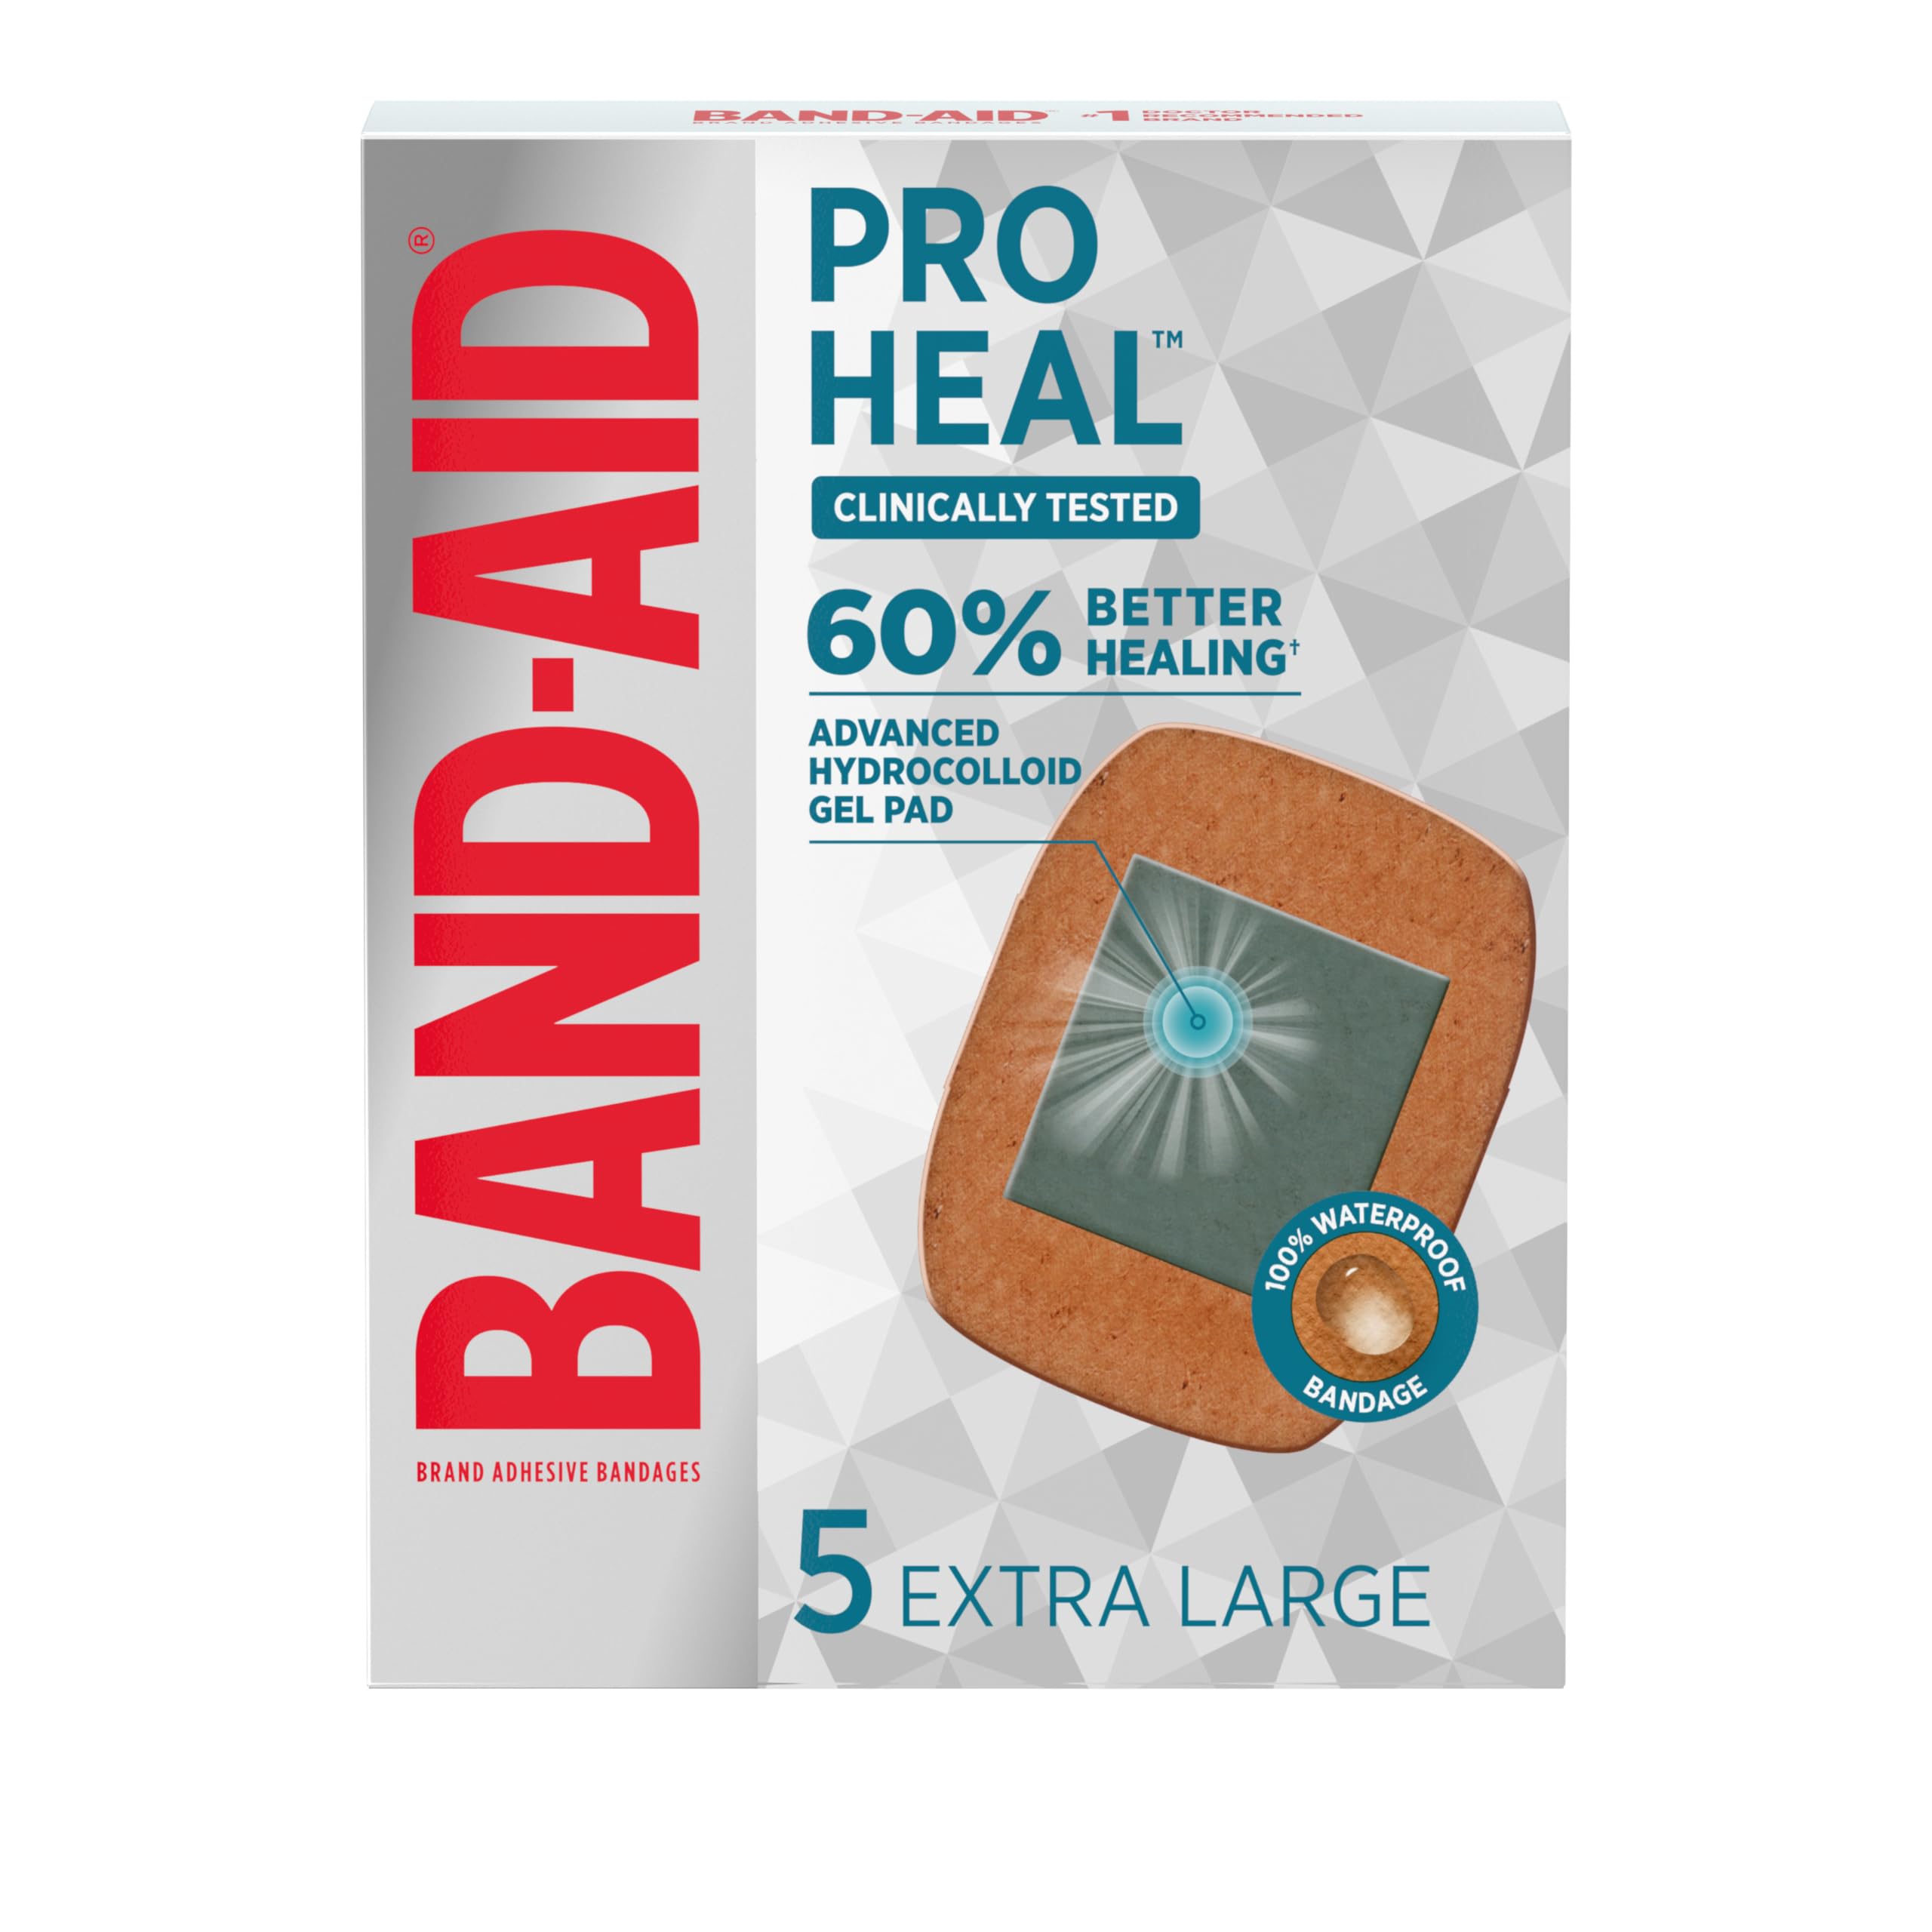 Band-Aid Brand Pro Heal Adhesive Bandages with Hydrocolloid Gel Pads, Extra Large Clinically Tested Waterproof Bandages for Better Healing of Minor Wounds, Sterile First Aid Bandages, 5 ct